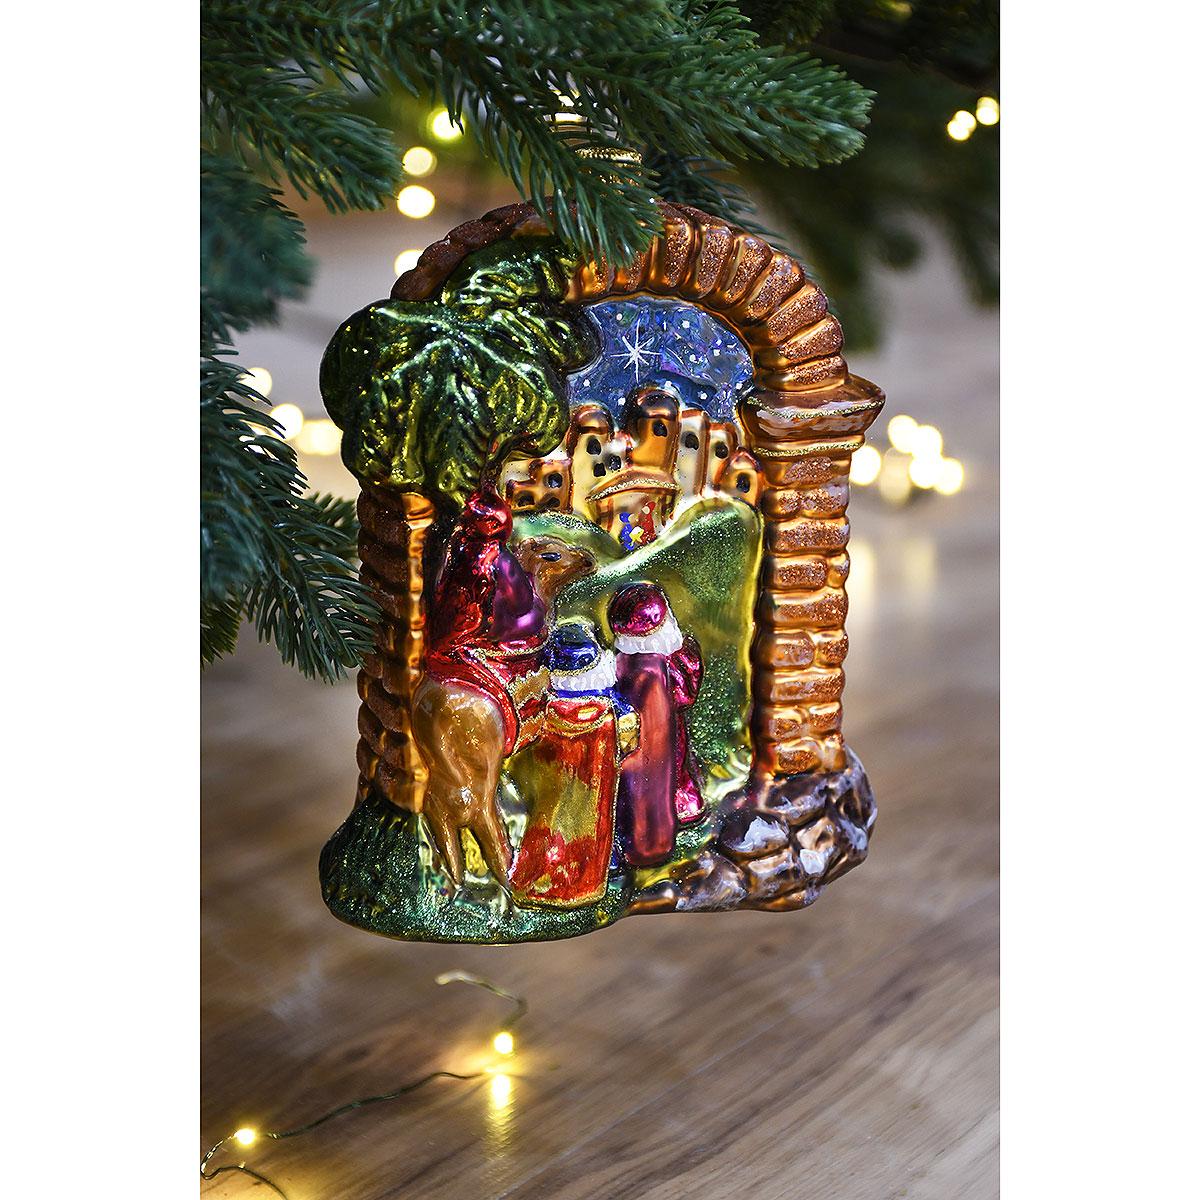 3 Wise Men Bronner's 2019 Annual Glass Form Ornament